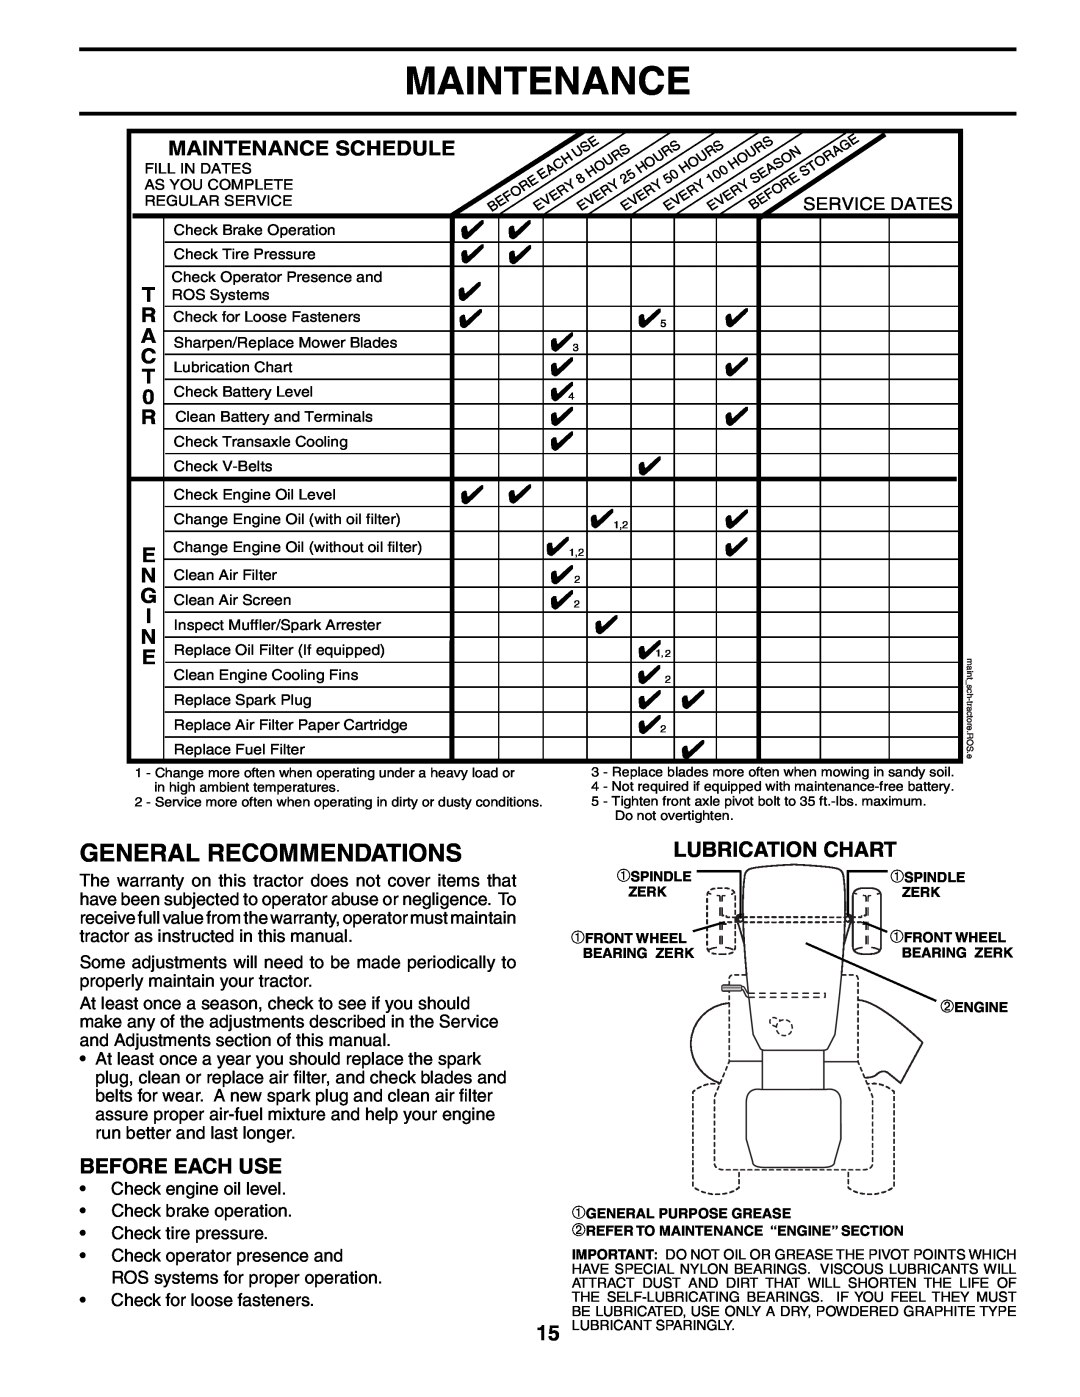 Poulan 195620 manual General Recommendations, Lubrication Chart, Before Each Use, Maintenance Schedule 